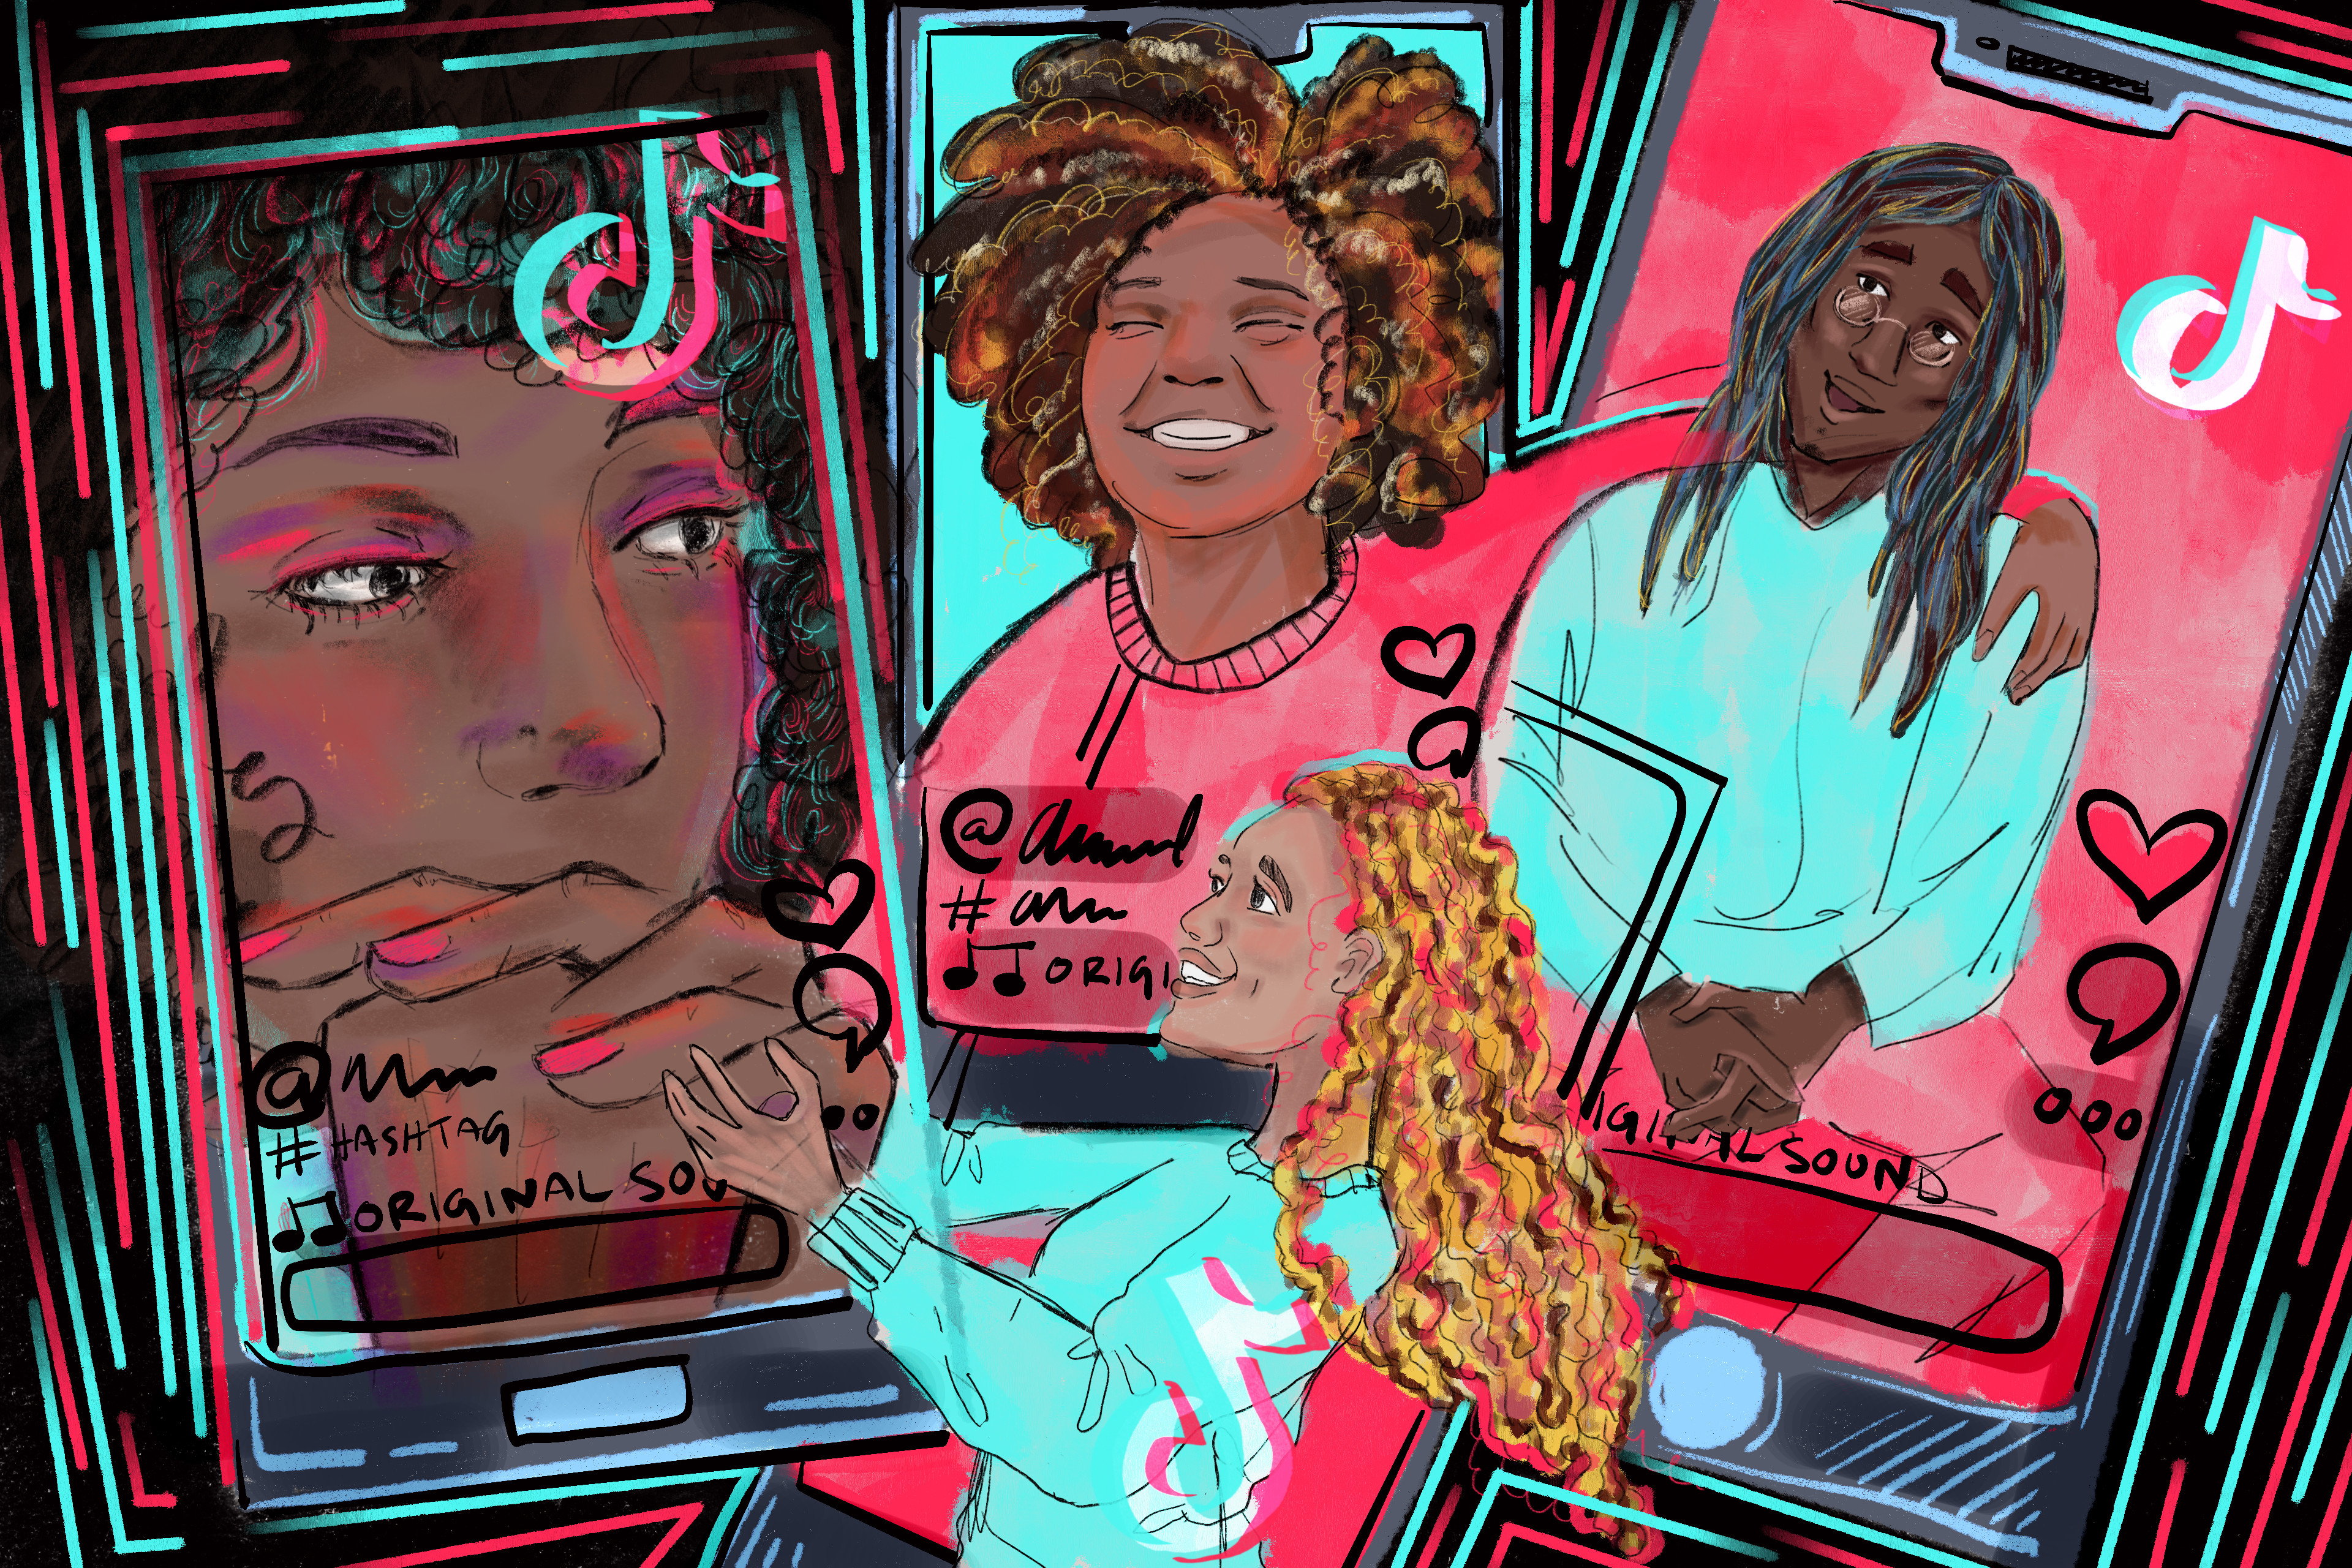 A digital illustration in watercolor and pencil. The image is made up of four smart-phone screens overlapped with one another. The screen on the left shows a Black woman with a thoughtful expression; her hands are linked and cover the lower half of her face. In the top center screen is a Black woman with an afro, smiling widely with her arm around the man in the screen to her right. He sits relaxed with his hands linked in his lap, and wears glasses. The bottom-middle screen shows a Black woman with long, blonde dreadlocks reaching out to the woman in the screen to her left. The palette of the image is neon-watermelon and cyan; TikTok's official colors.